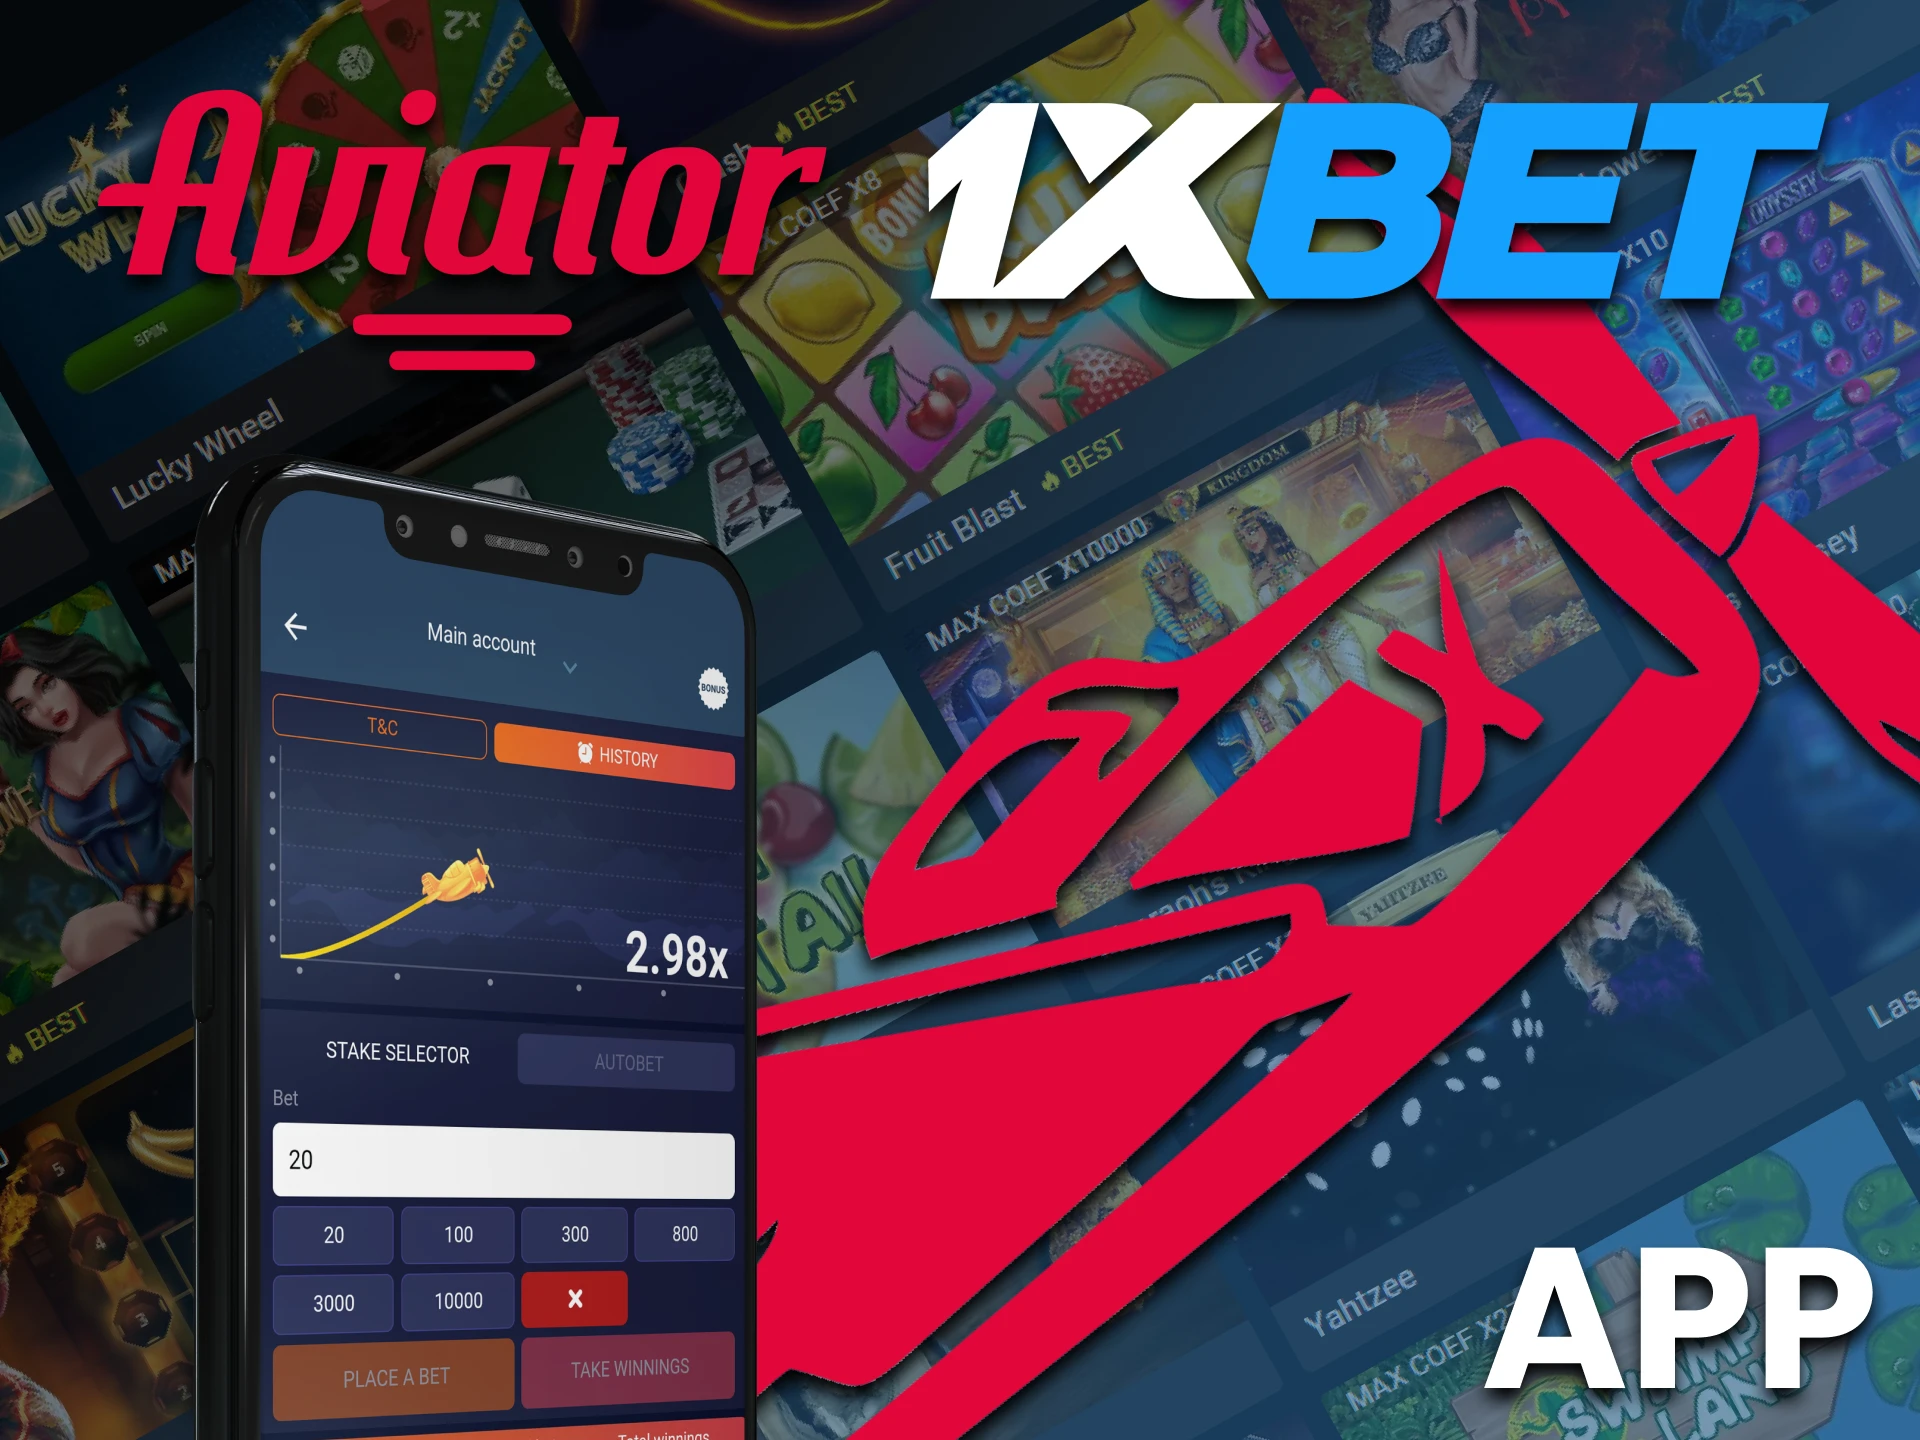 In the 1xbet app, you can play the Aviator game as well.